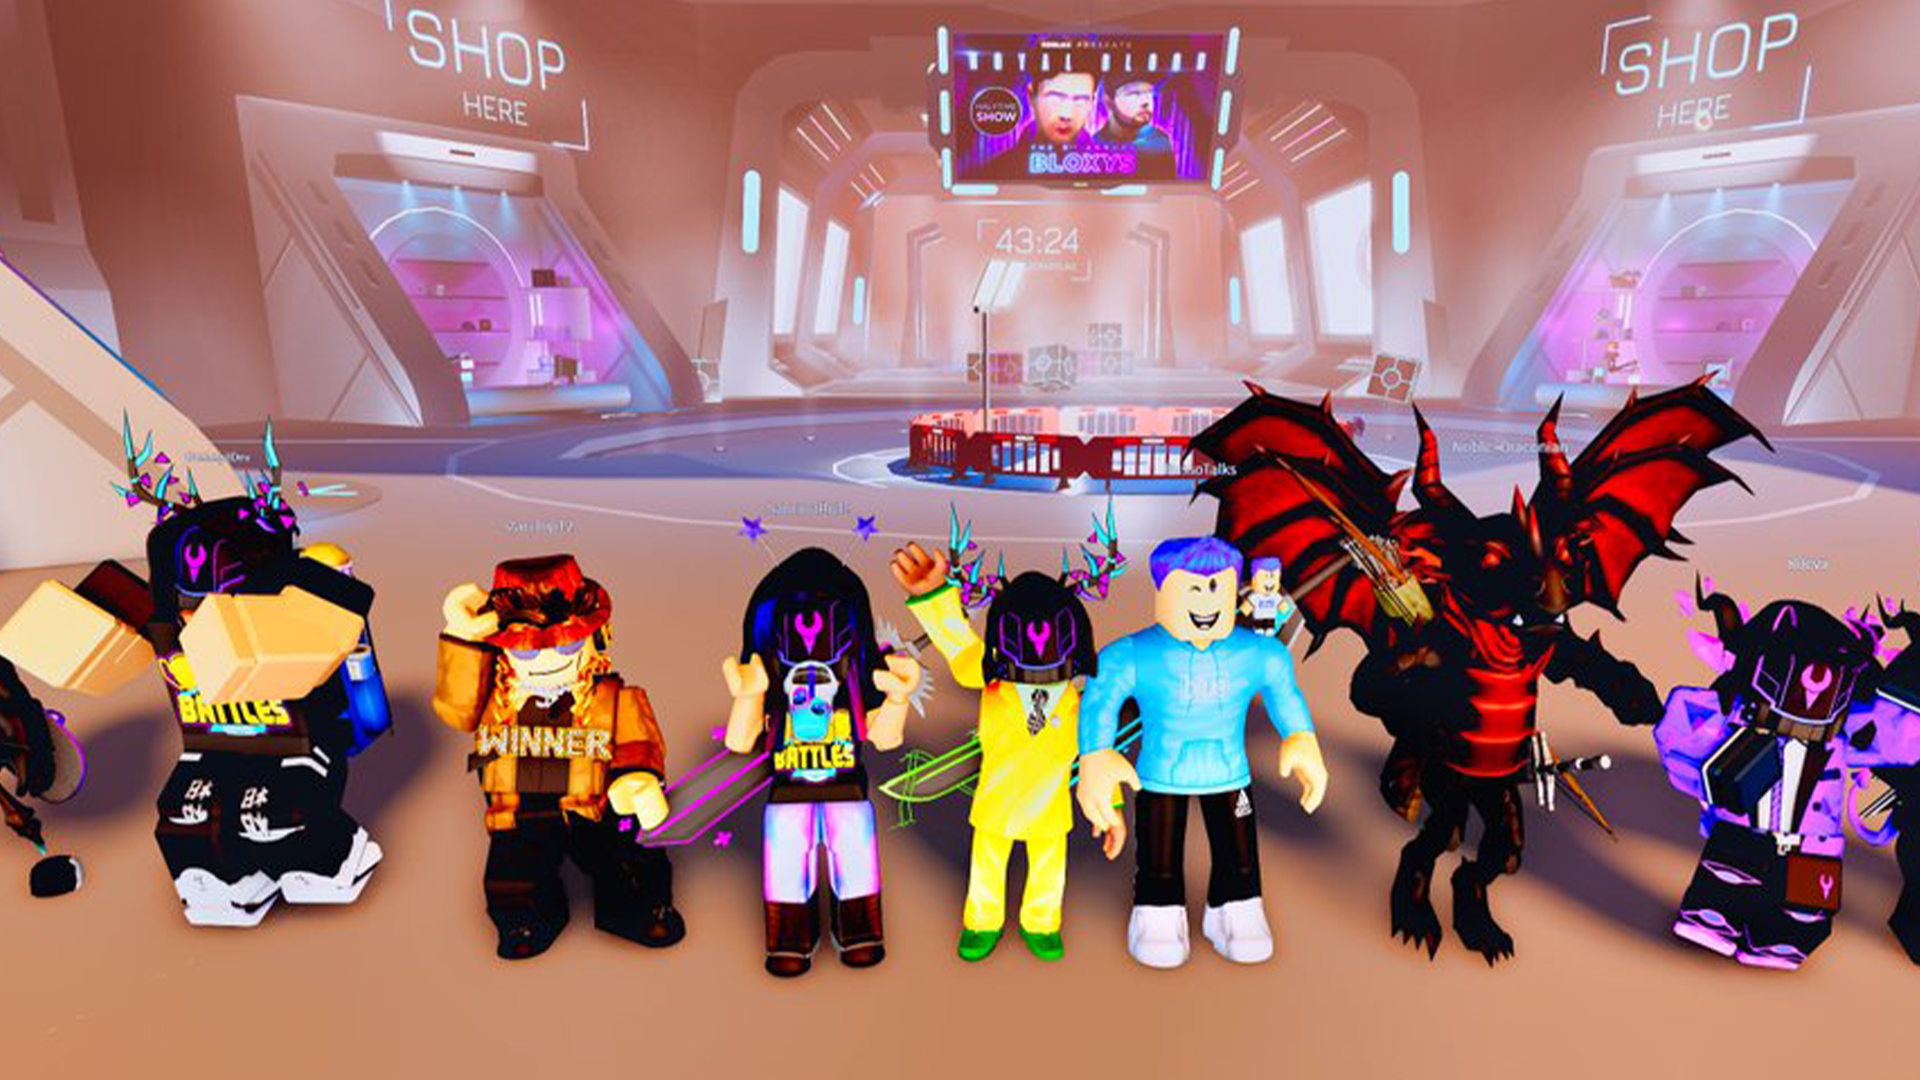 GameU on X: For all of our #Roblox fans, it's time to go all out